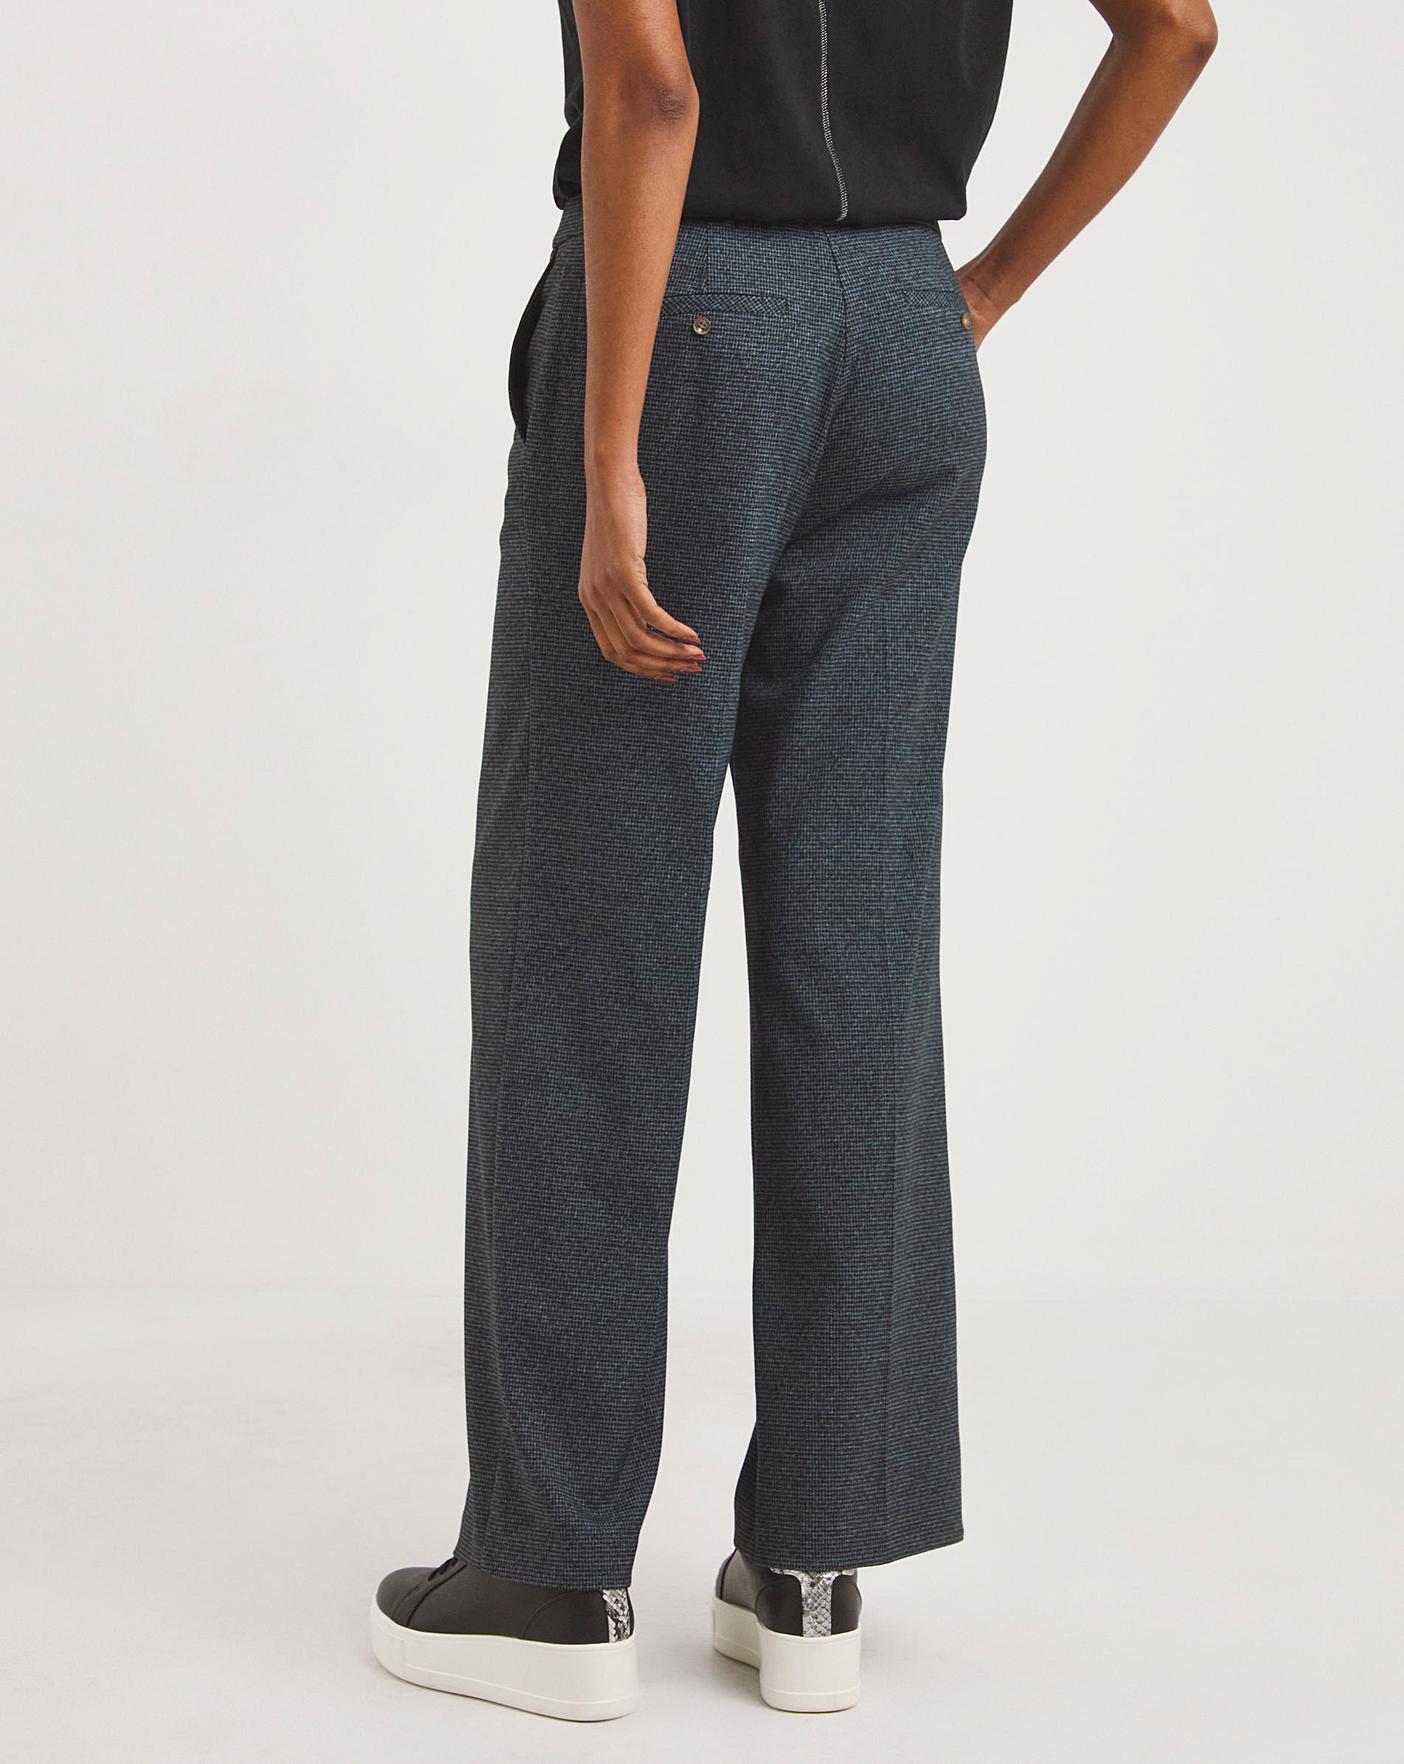 Discover more than 52 hobbs trousers sale latest - in.cdgdbentre